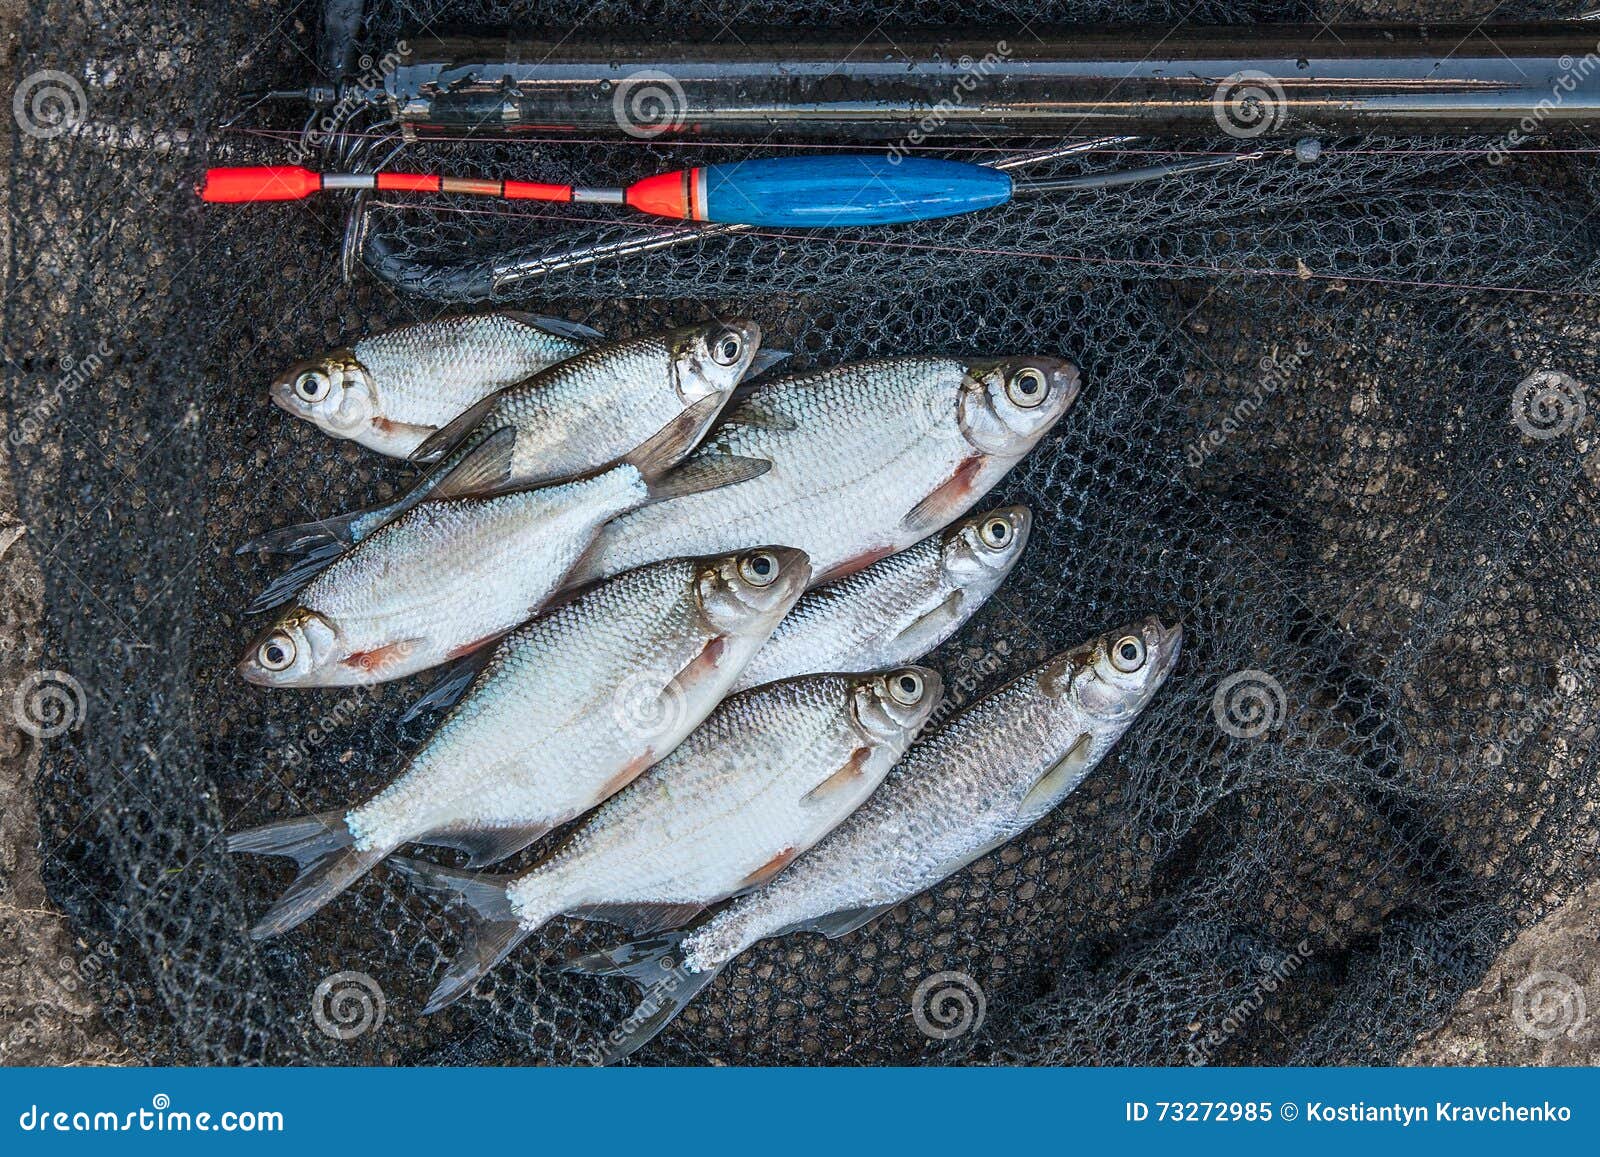 Several Ablet, Bream Fish on Fishing Net. Fishing Rod with Float